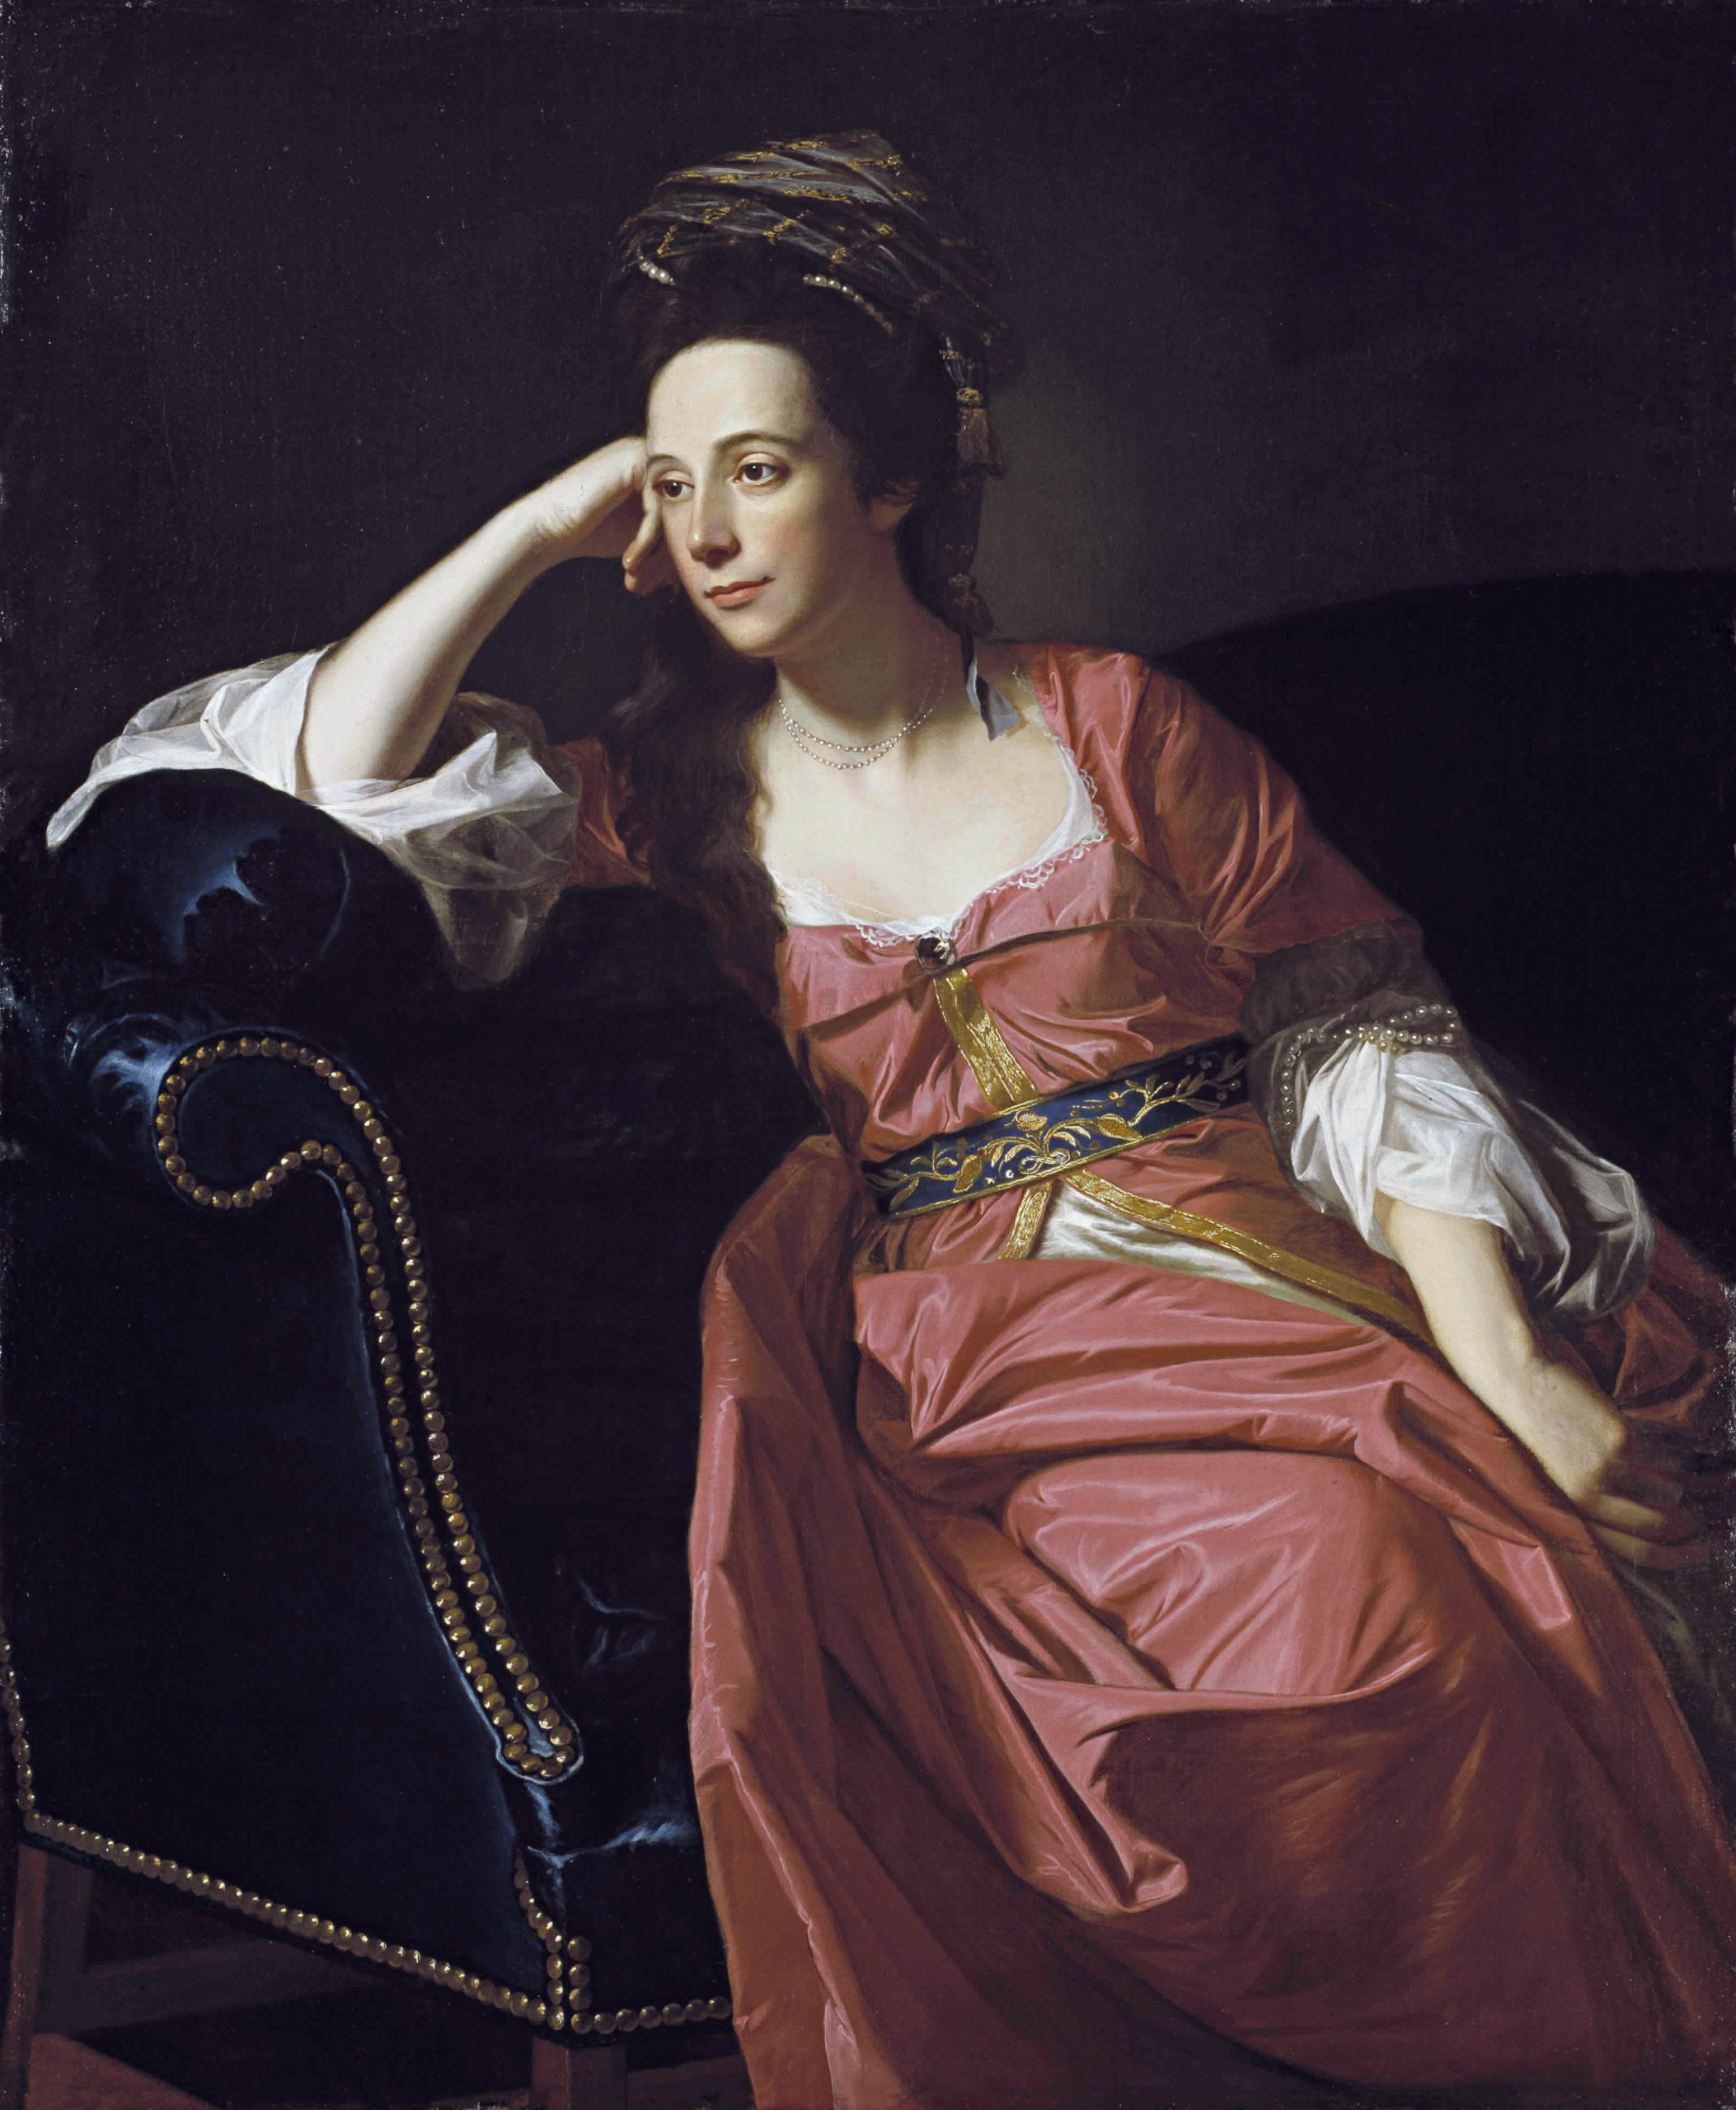 Margaret Kemble Gage, portrayed here by John Singleton Copley, relaxes in faux Turkish garb. Copley traveled to New York to paint the portrait. 